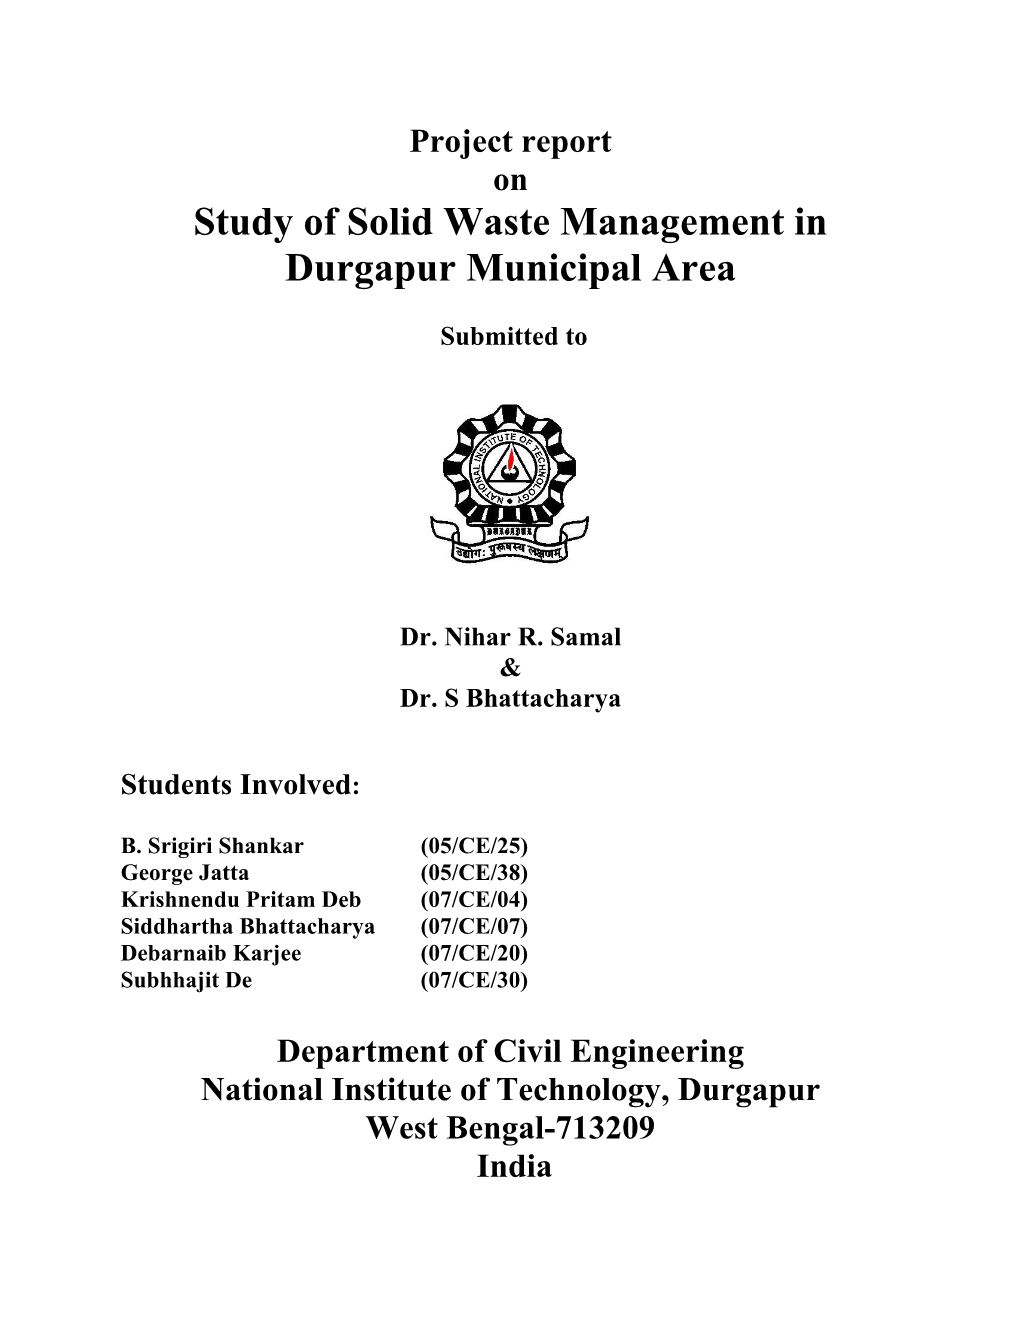 Study of Solid Waste Management in Durgapur Municipal Area